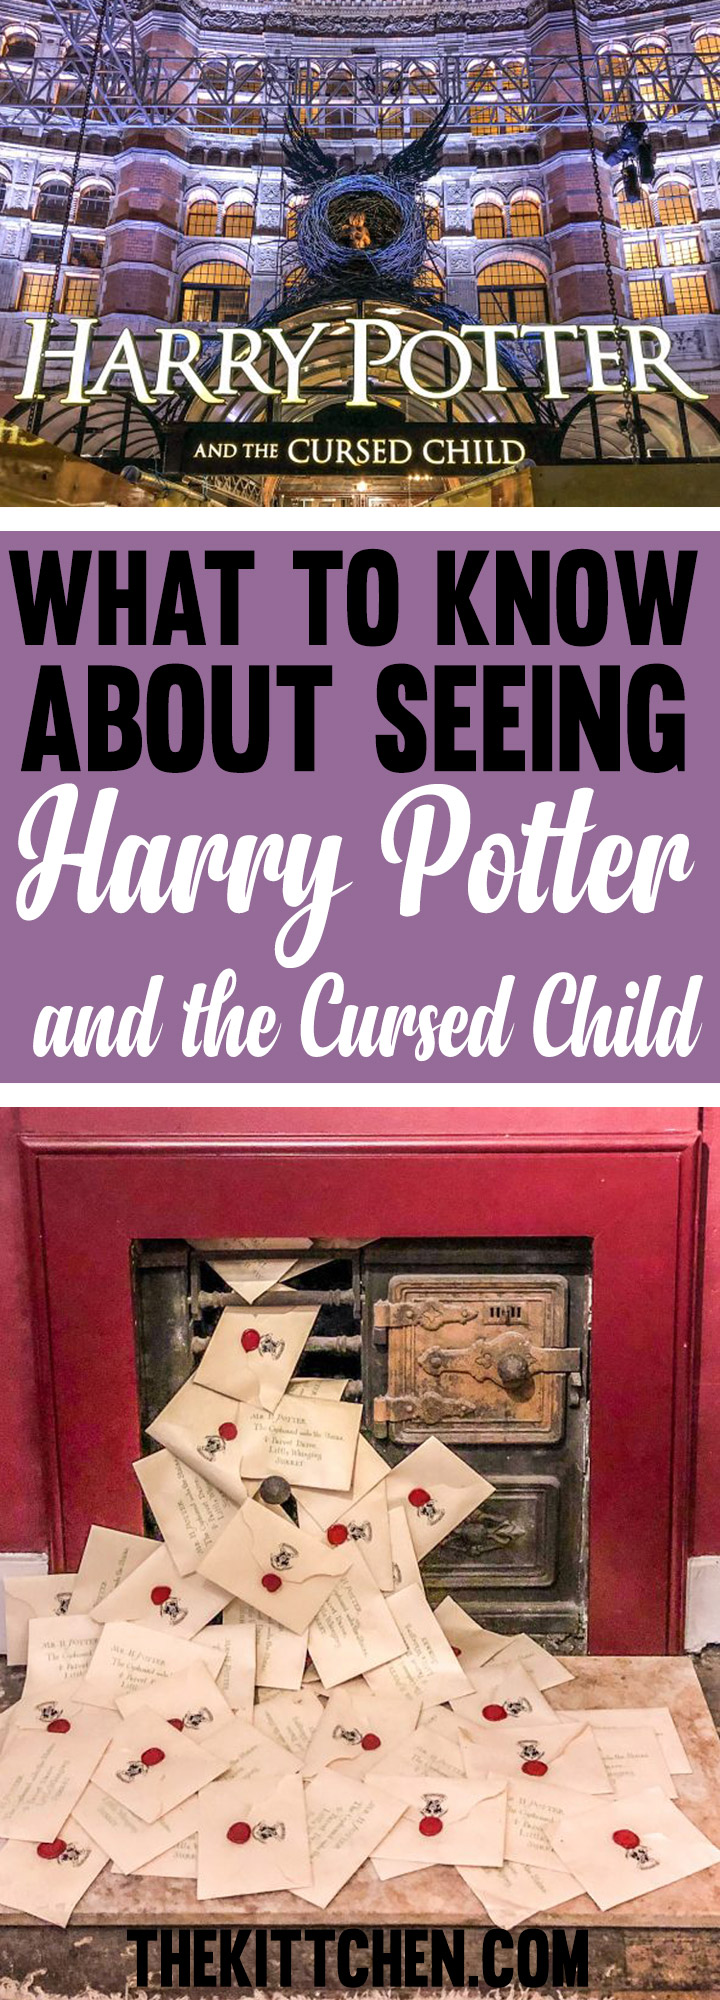 What to Know About Seeing Harry Potter and the Cursed Child